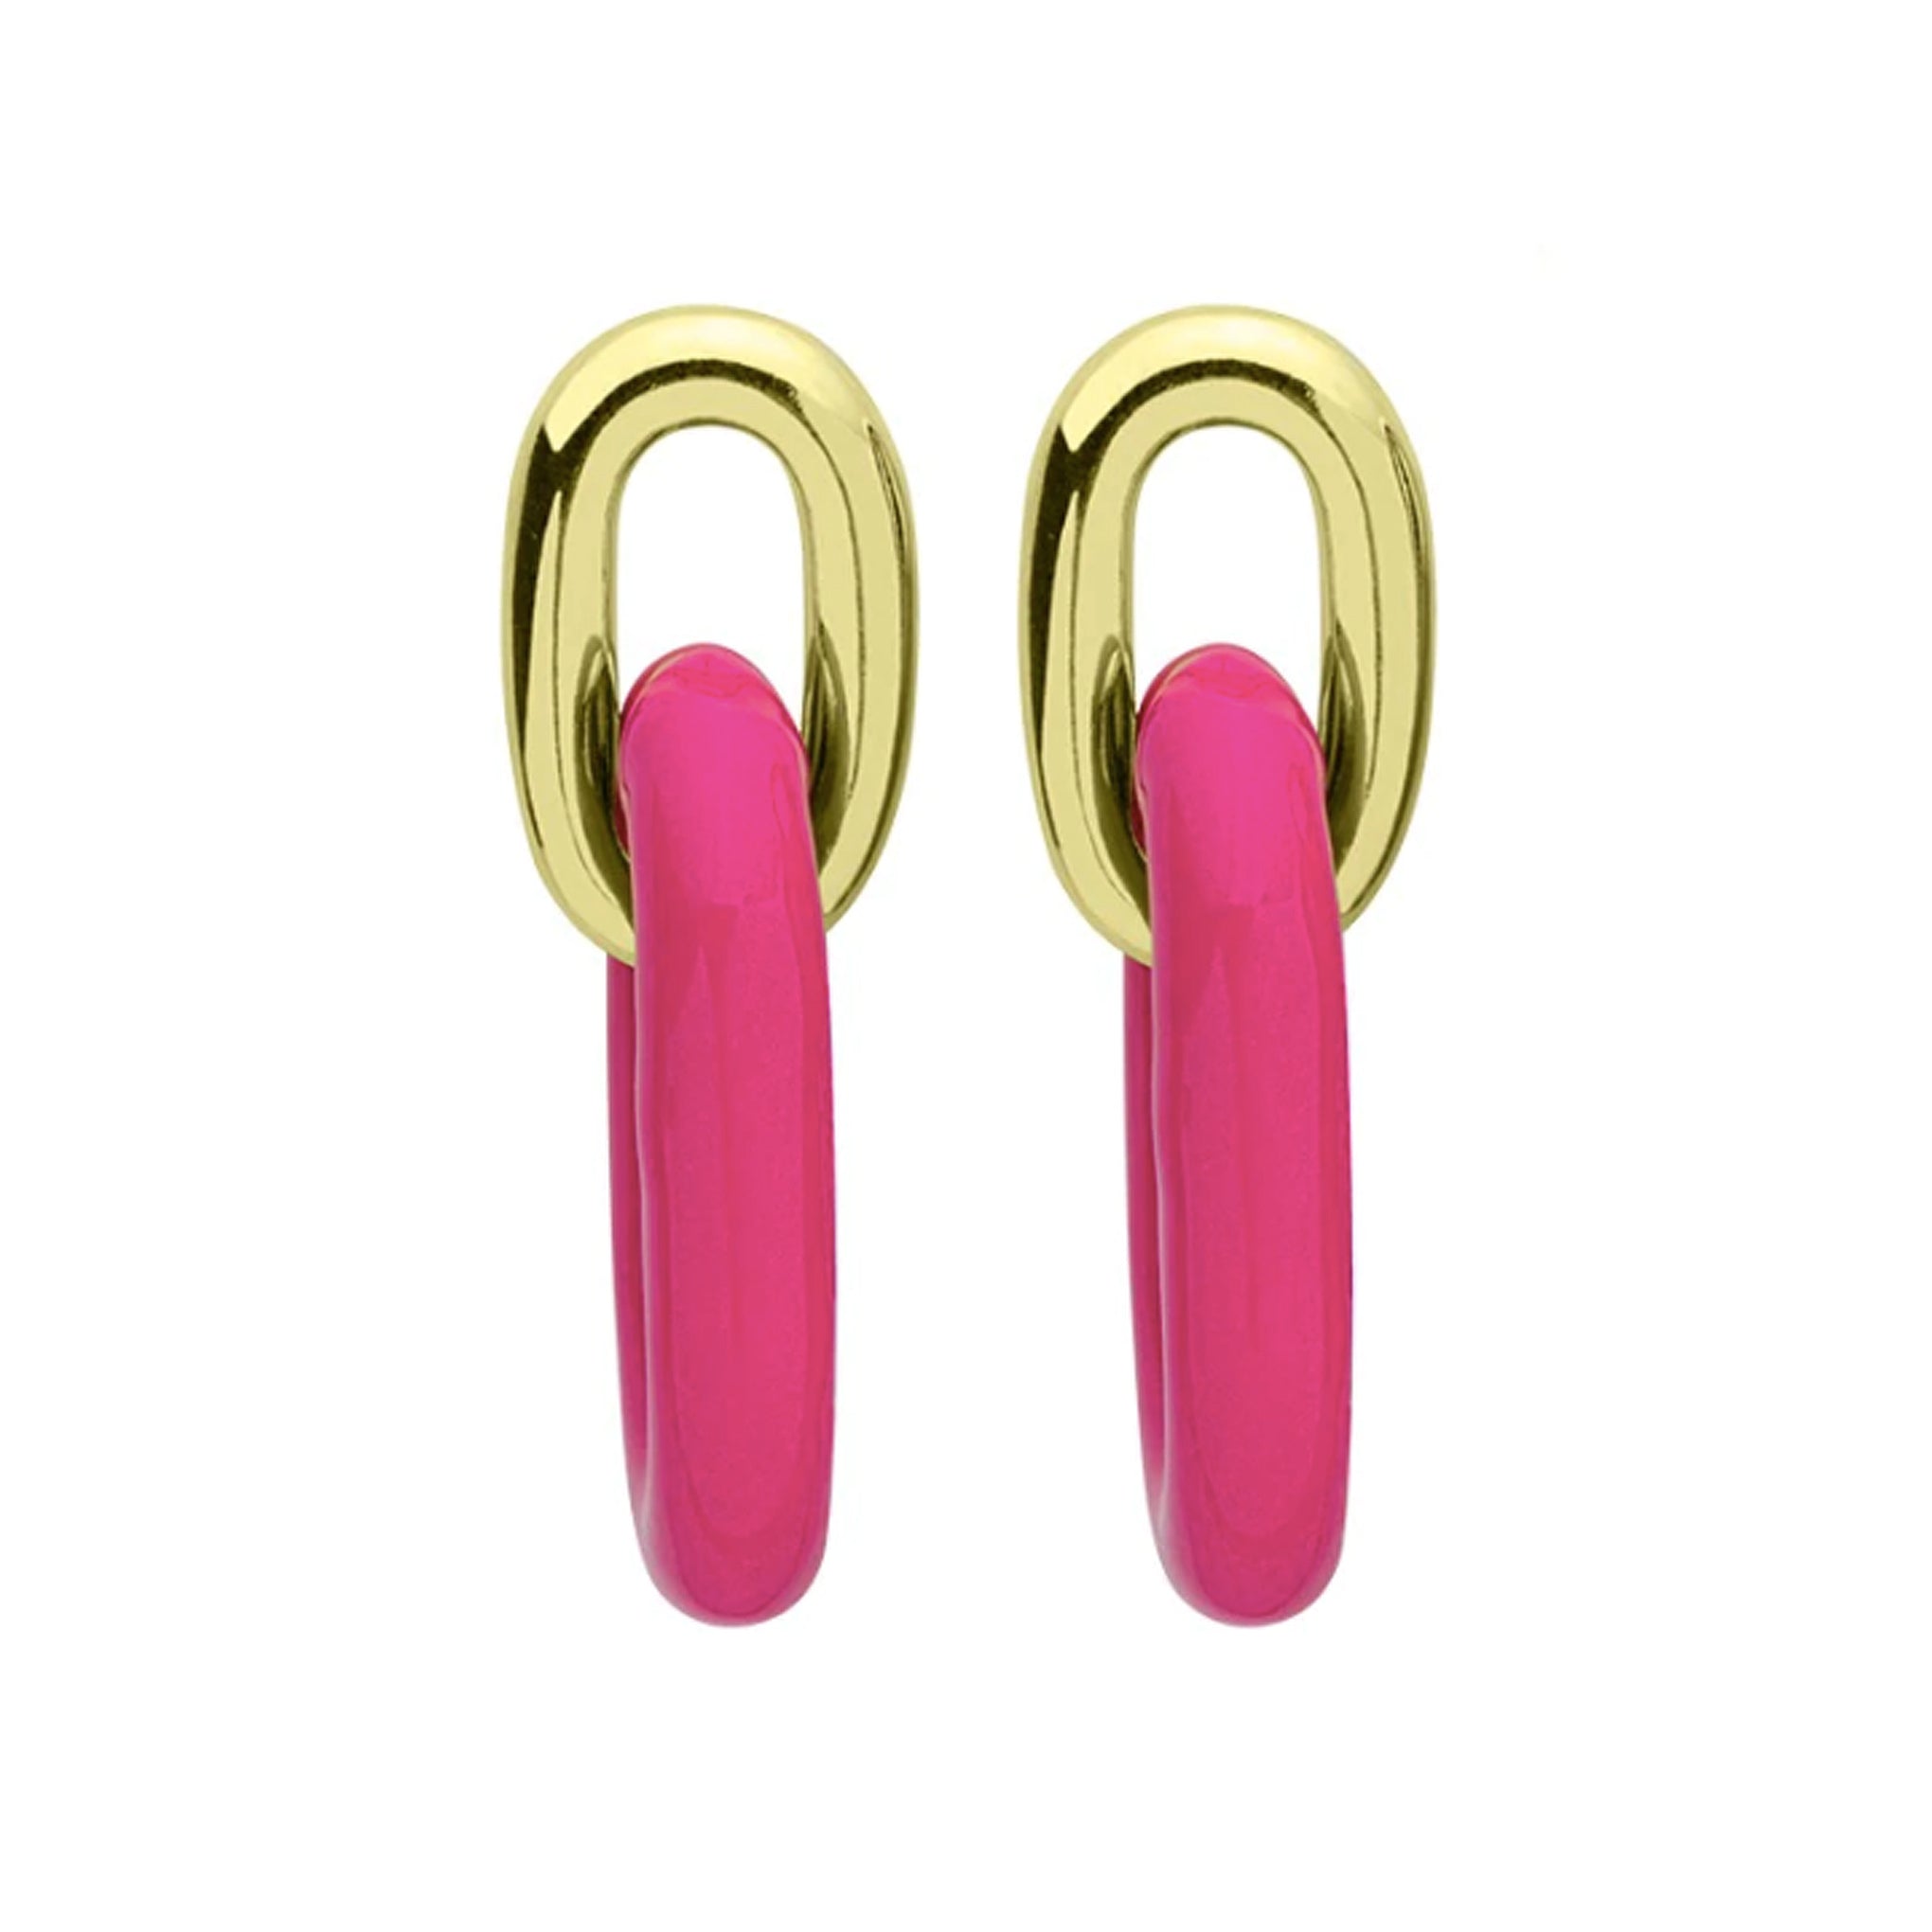 Sheila Fajl Small Shakedown Statement Earrings in Polished Gold and Pink